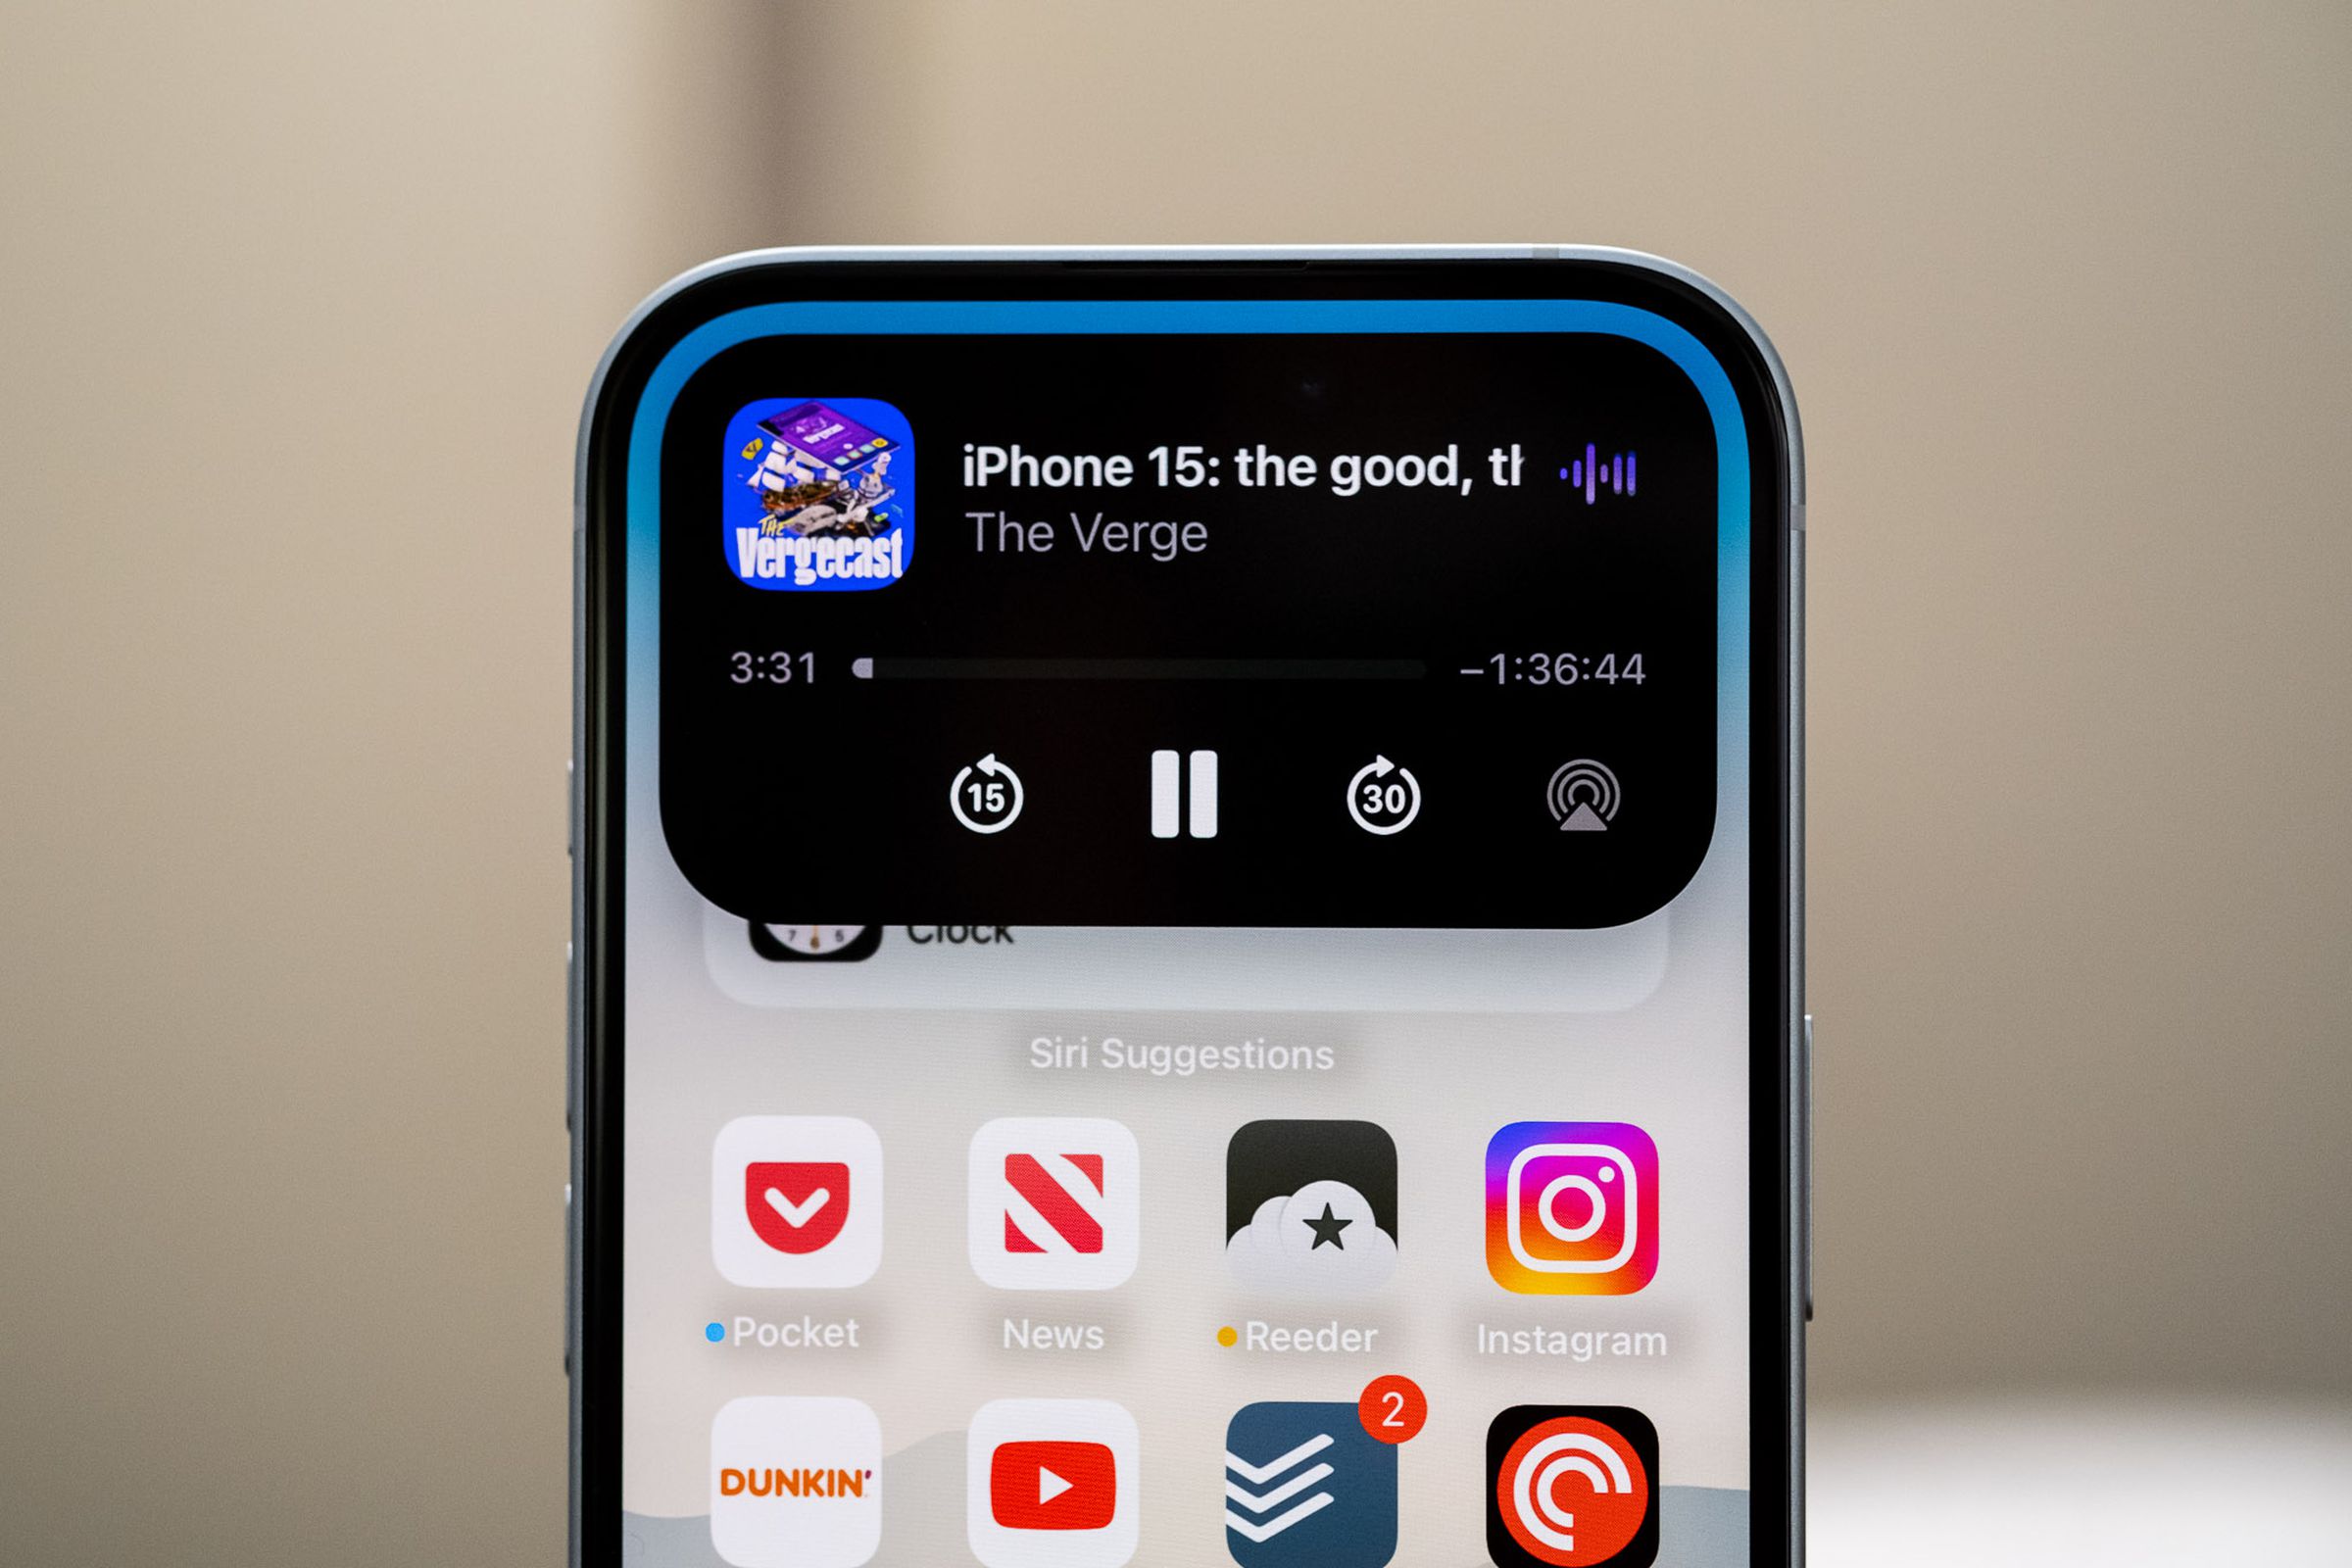 The Dynamic Island on the iPhone 15 showing a currently playing podcast